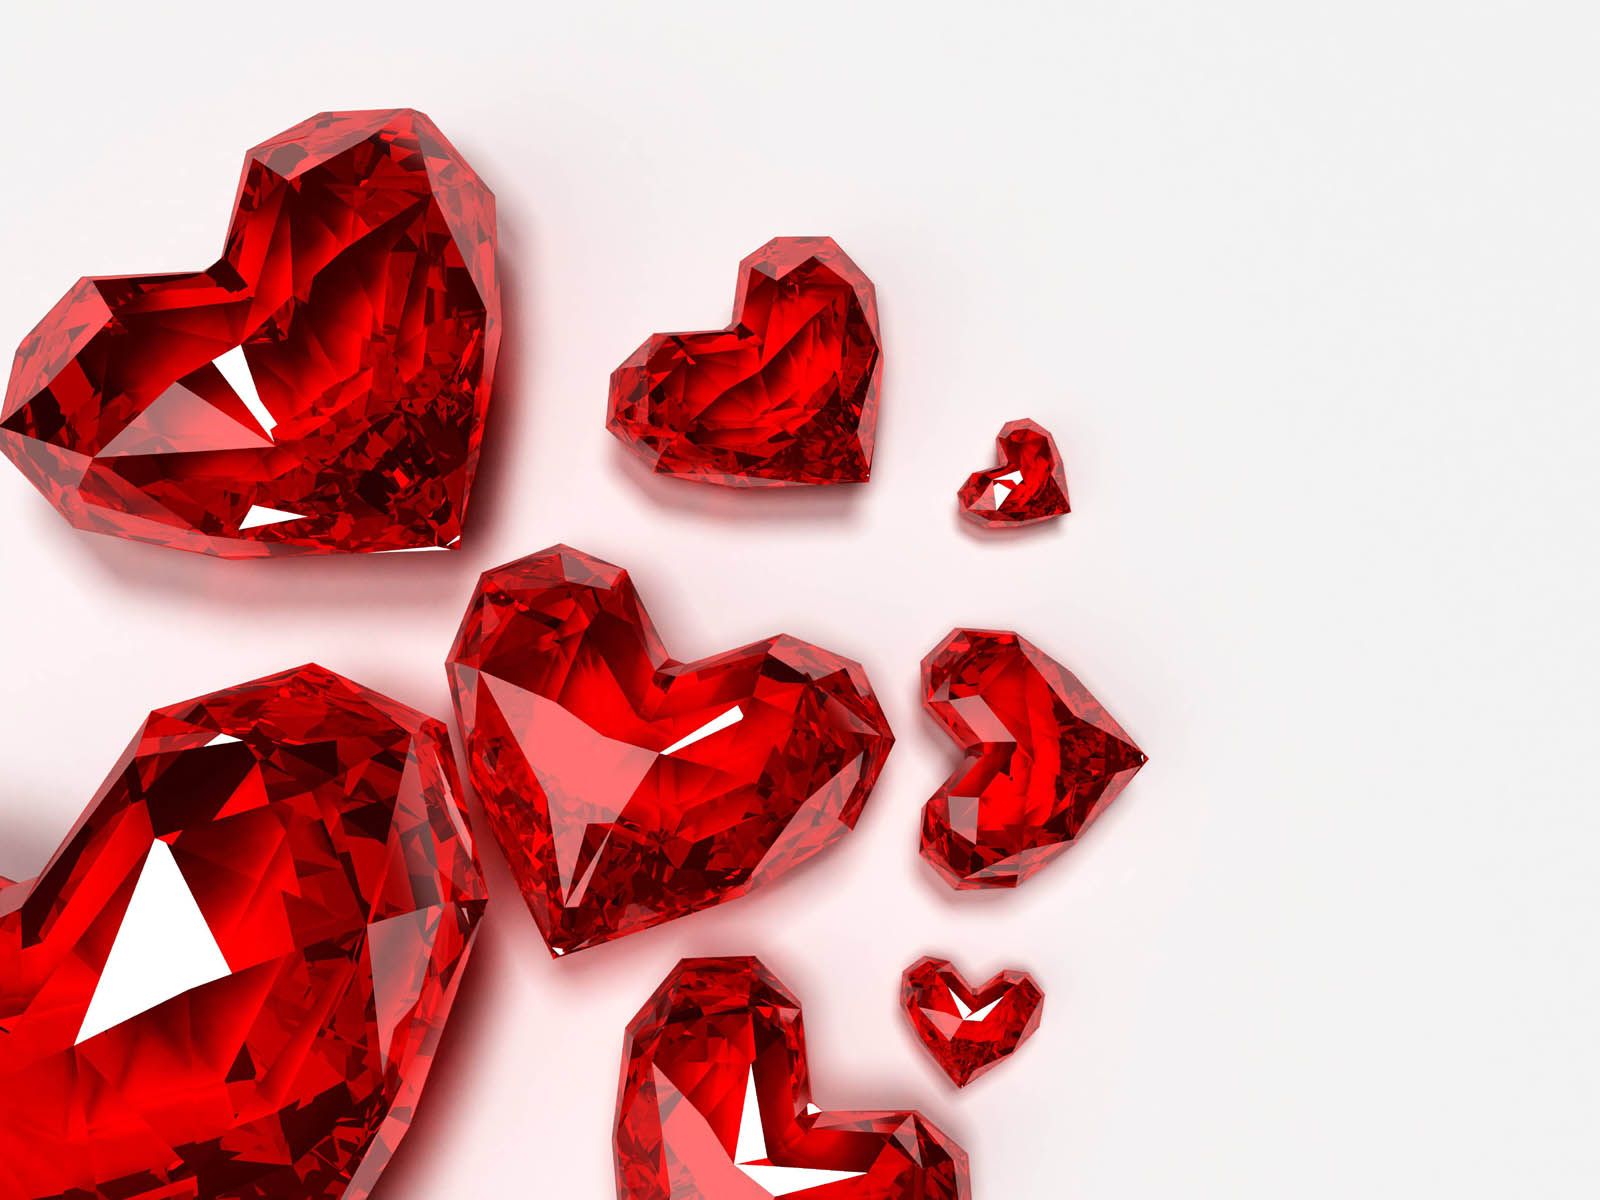 wallpaper: Crystal Red Hearts. Red heart, Red crystals, Crystals